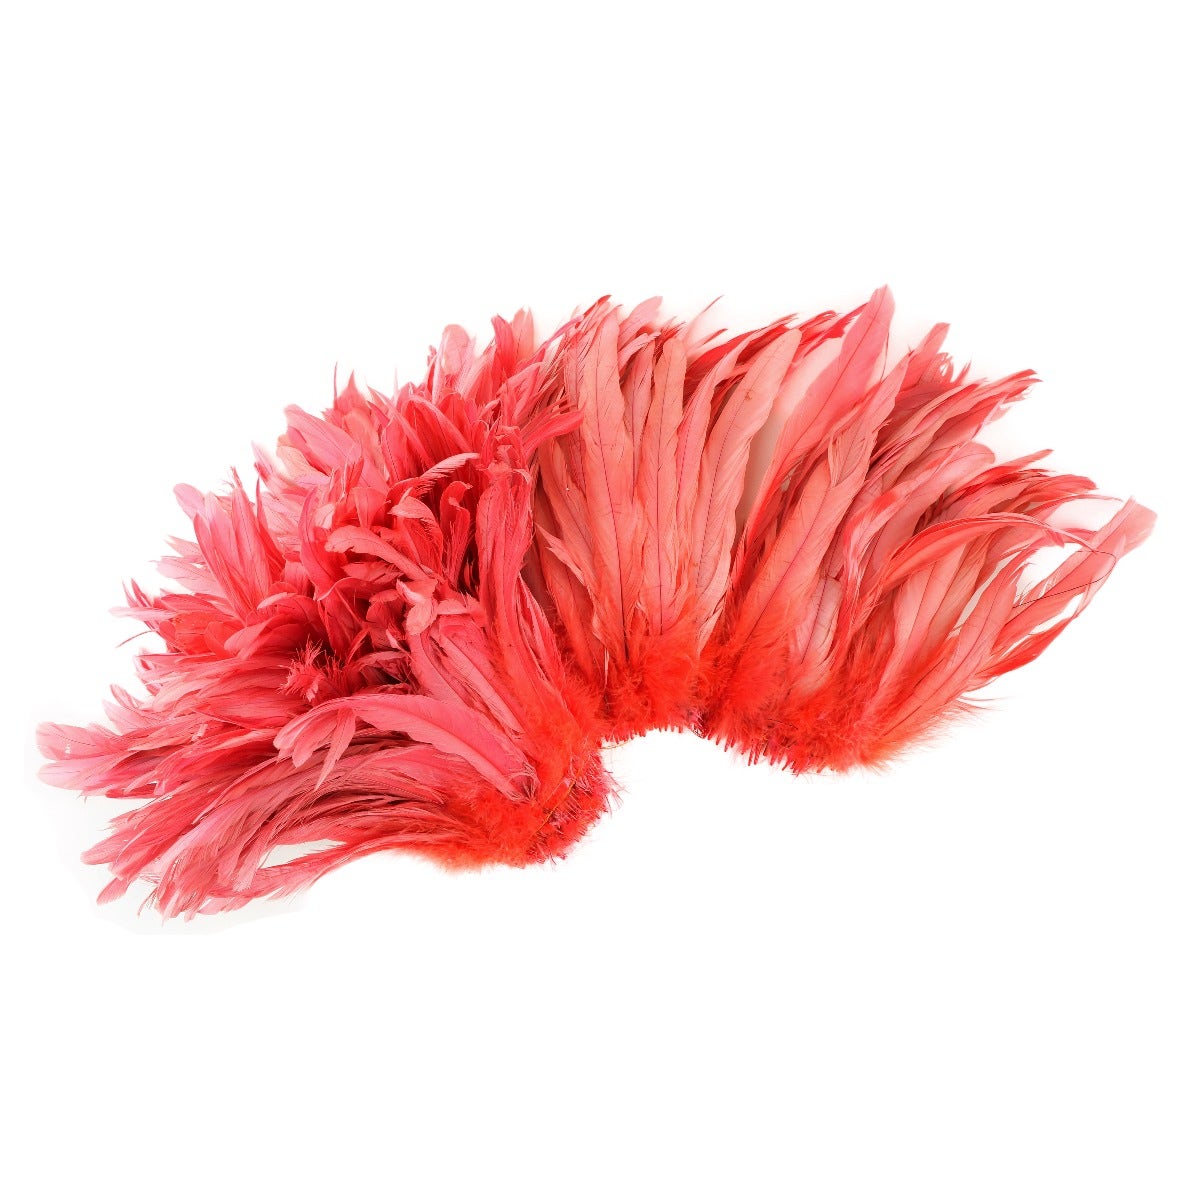 ROOSTER COQUE TAILS FEATHERS BLEACH DYED 7-10” - 1/2 Yard ( 18") - Coral